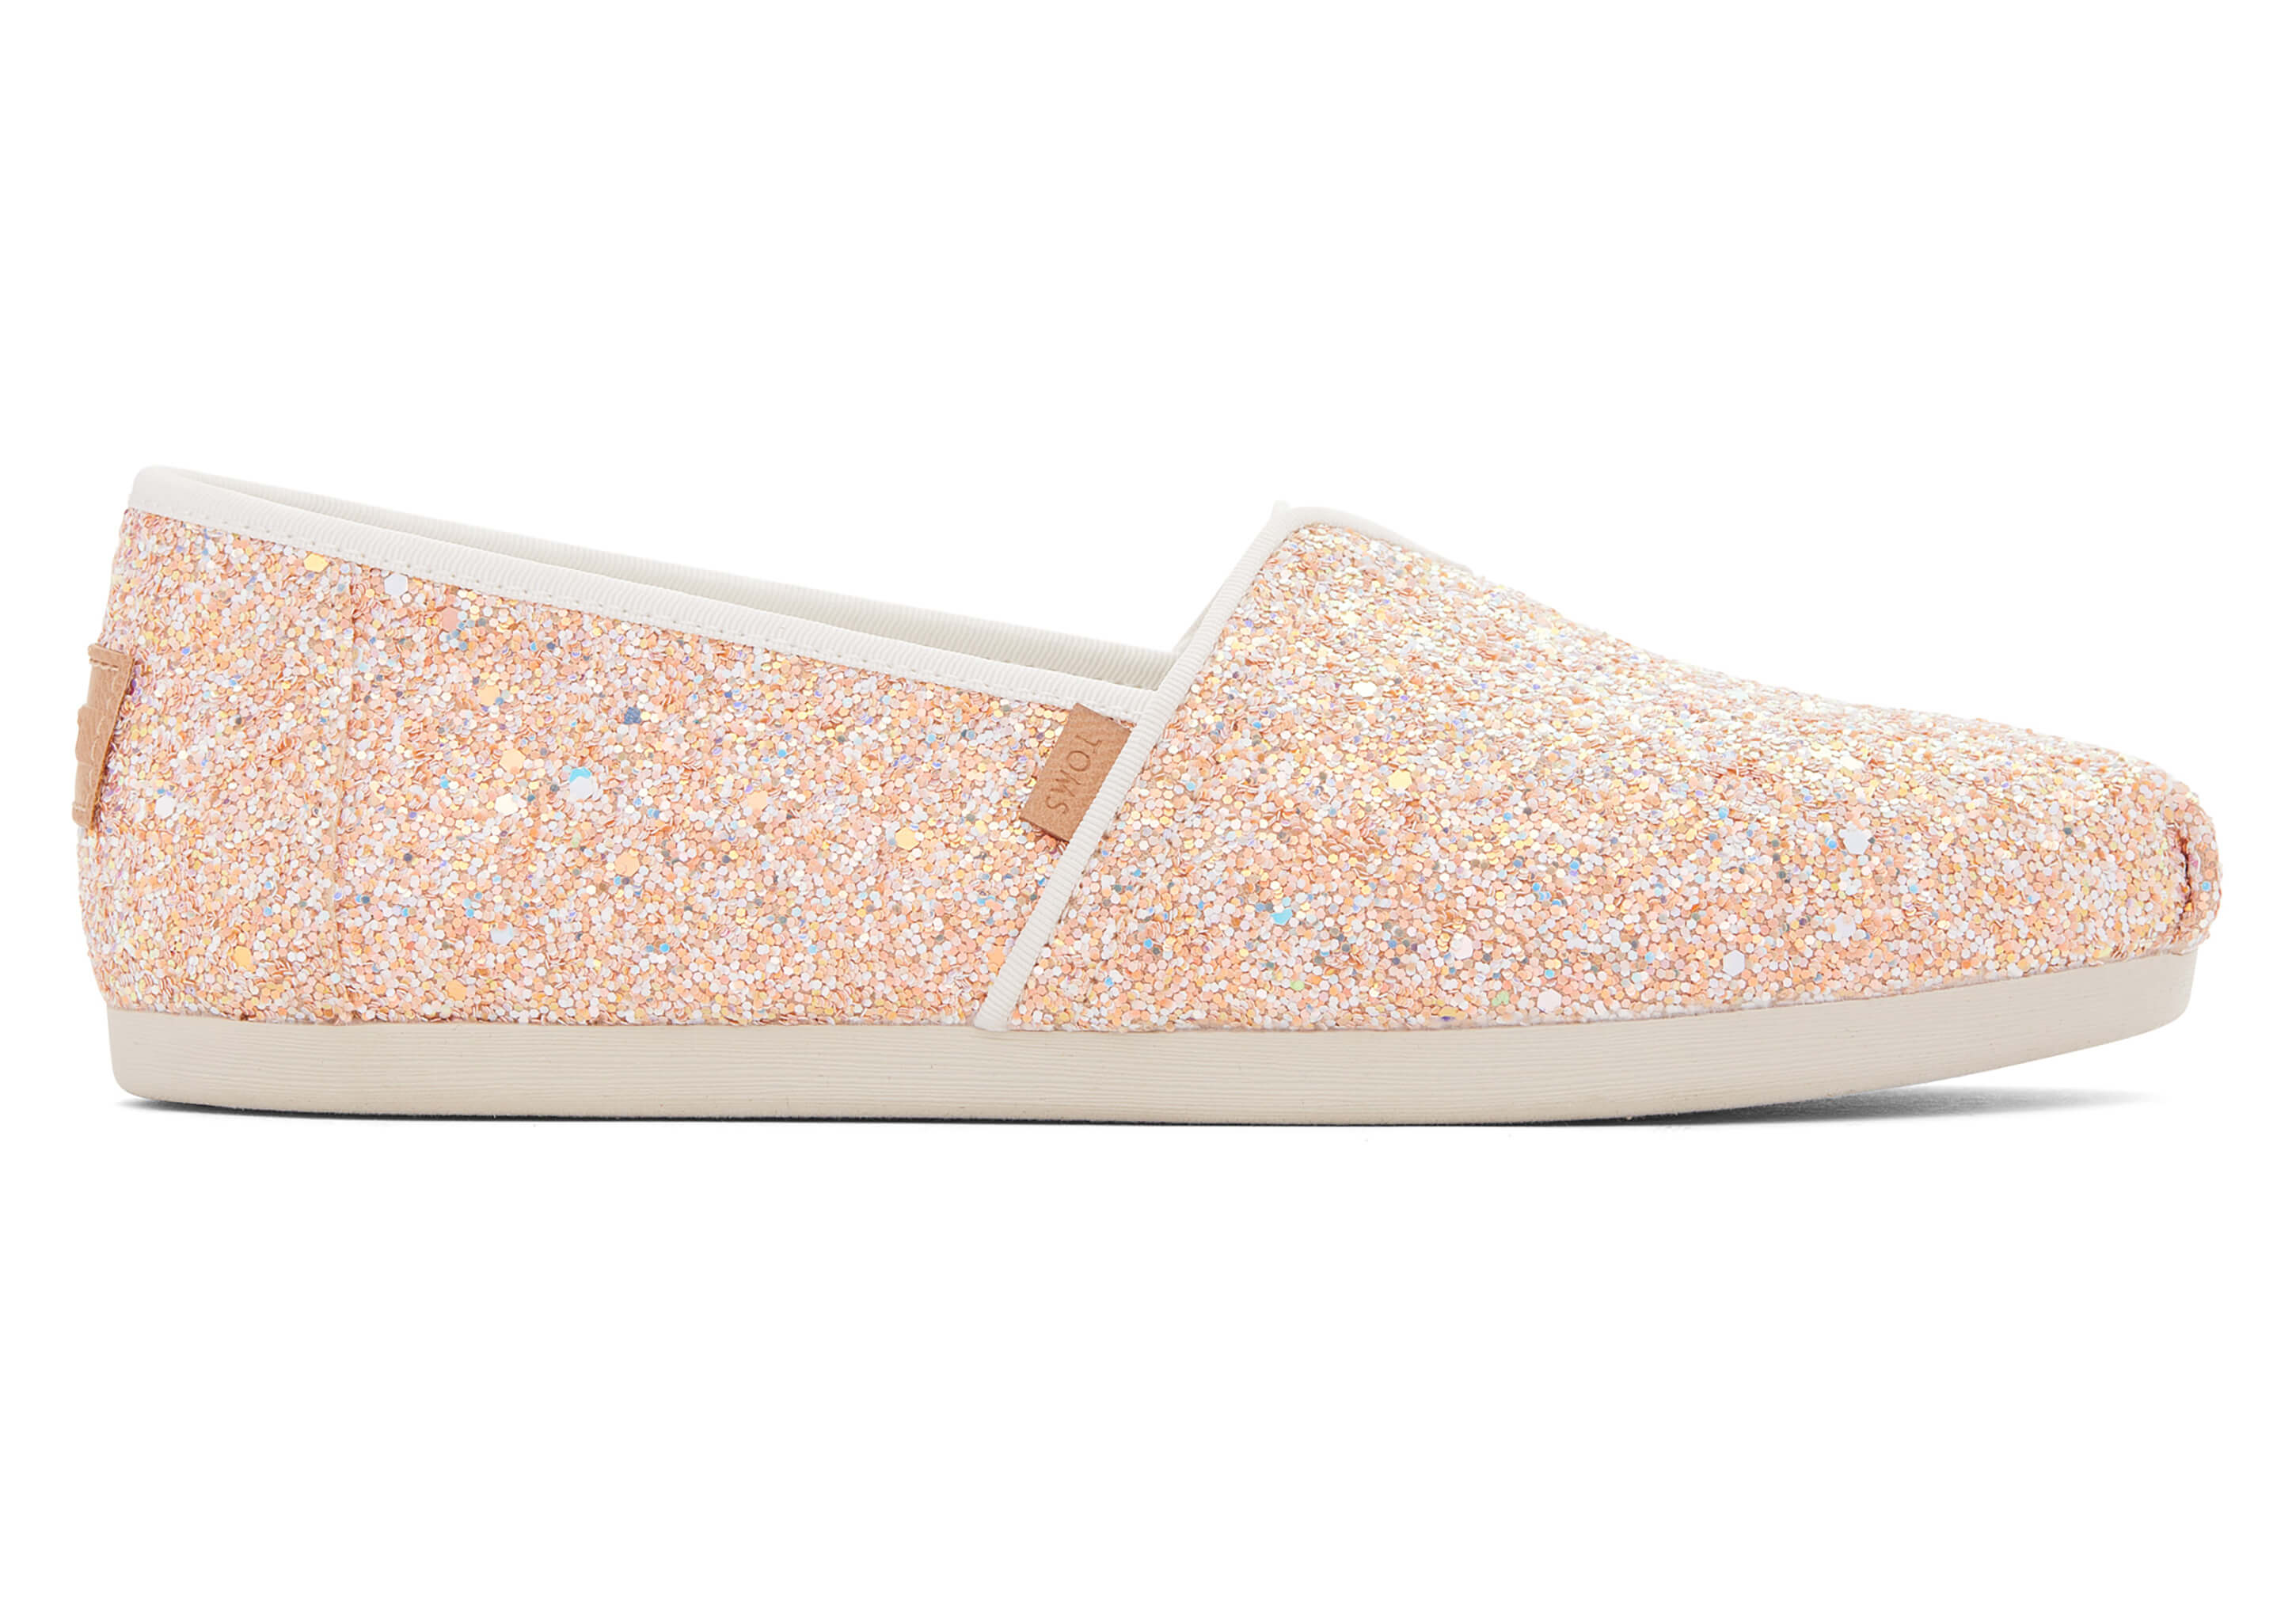 Toms women's sparkly shoes w7